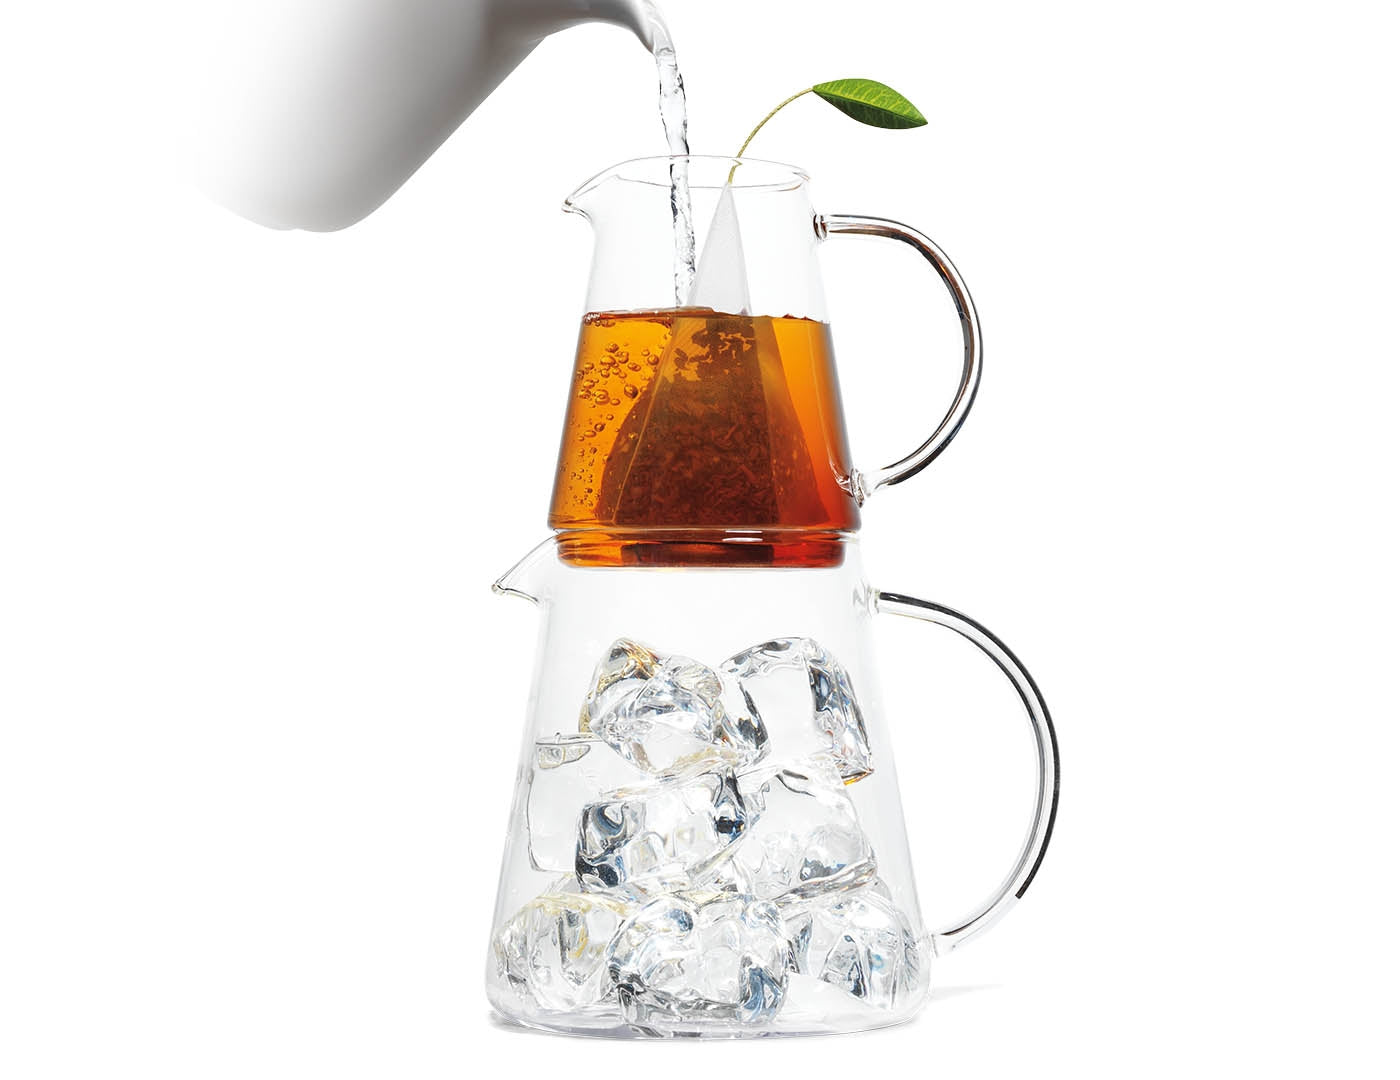 Tea Over Ice Pitcher Set, steeping infuser